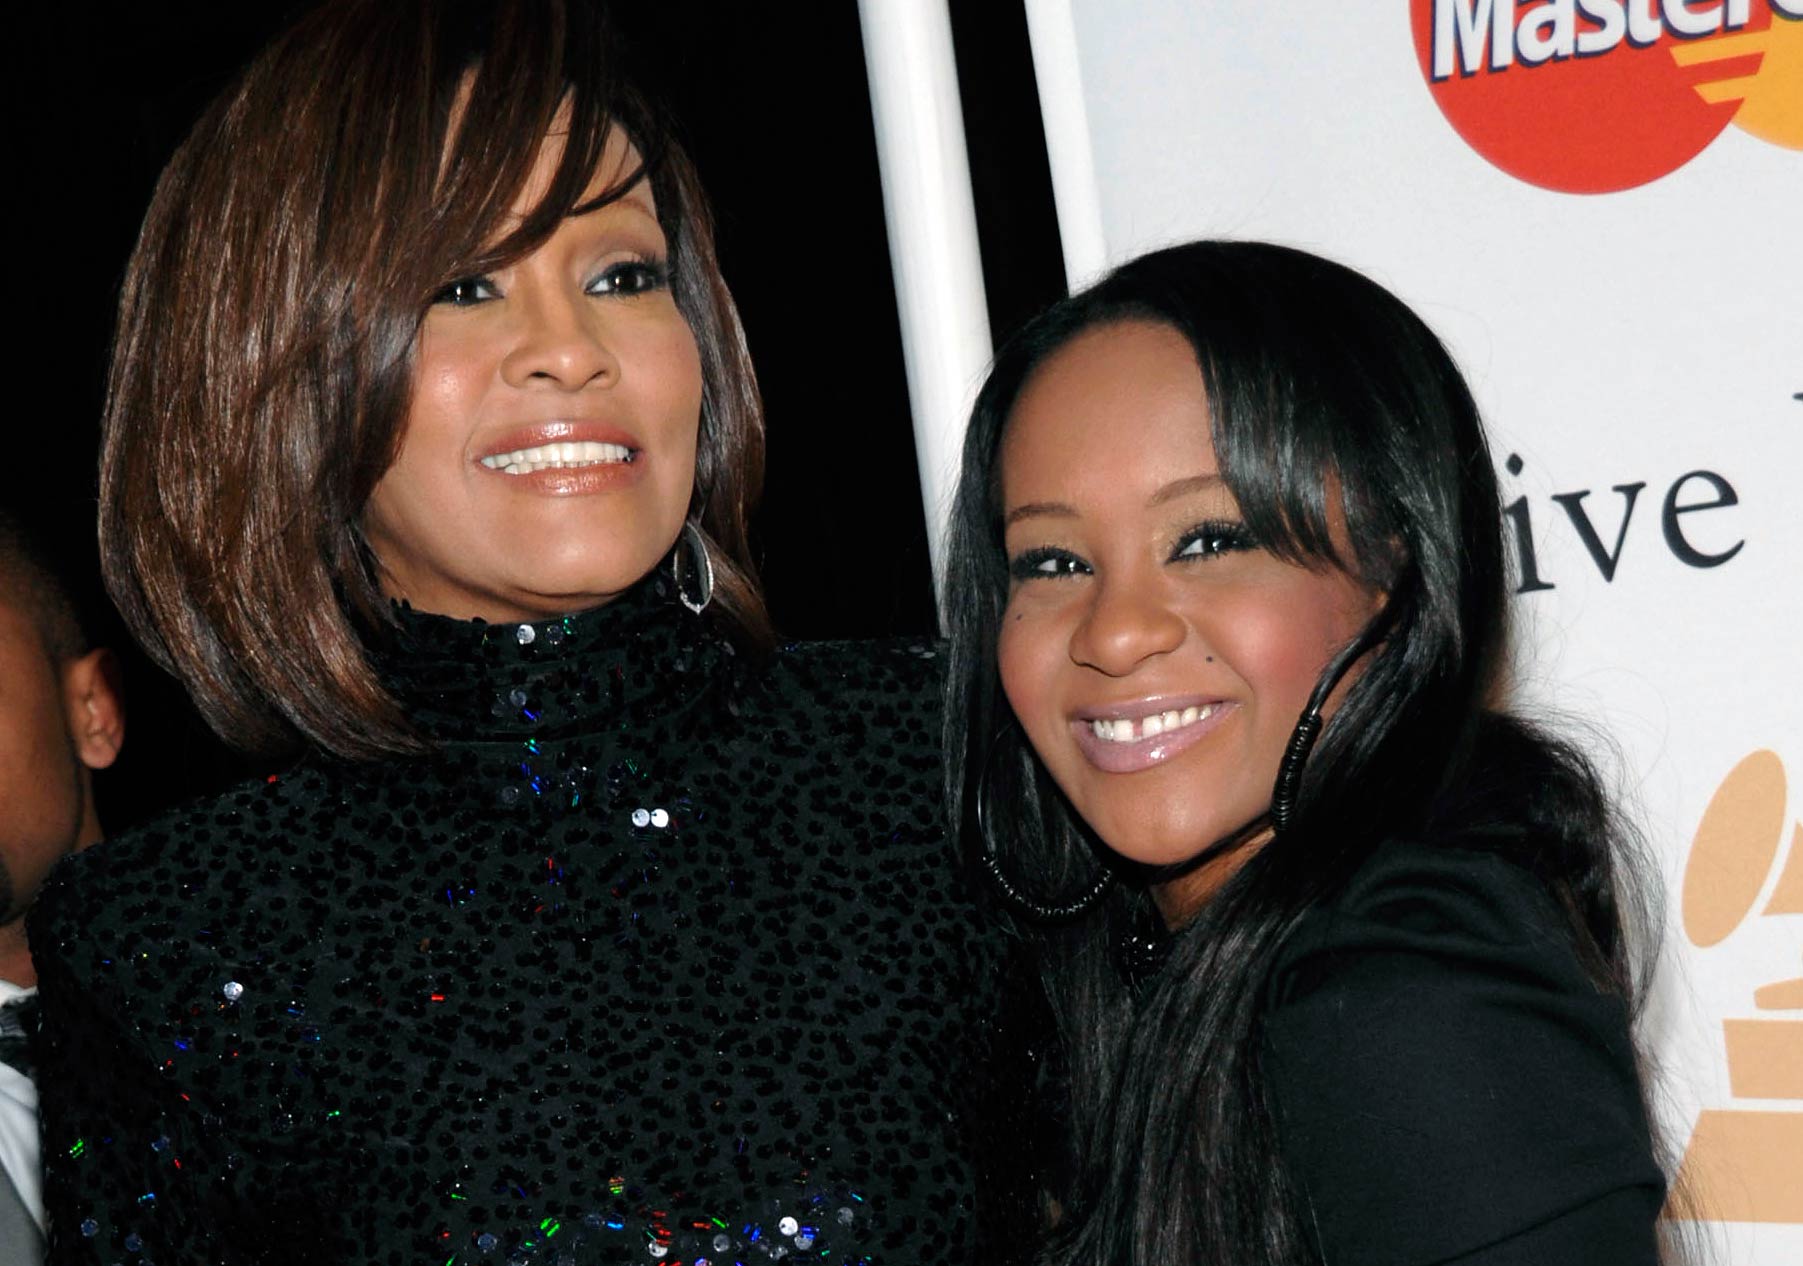 Whitney Houston, left, and her daughter Bobbi Kristina Brown arrive at an event in Beverly Hills, Calif. on Feb. 12, 2011. (Dan Steinberg—AP)